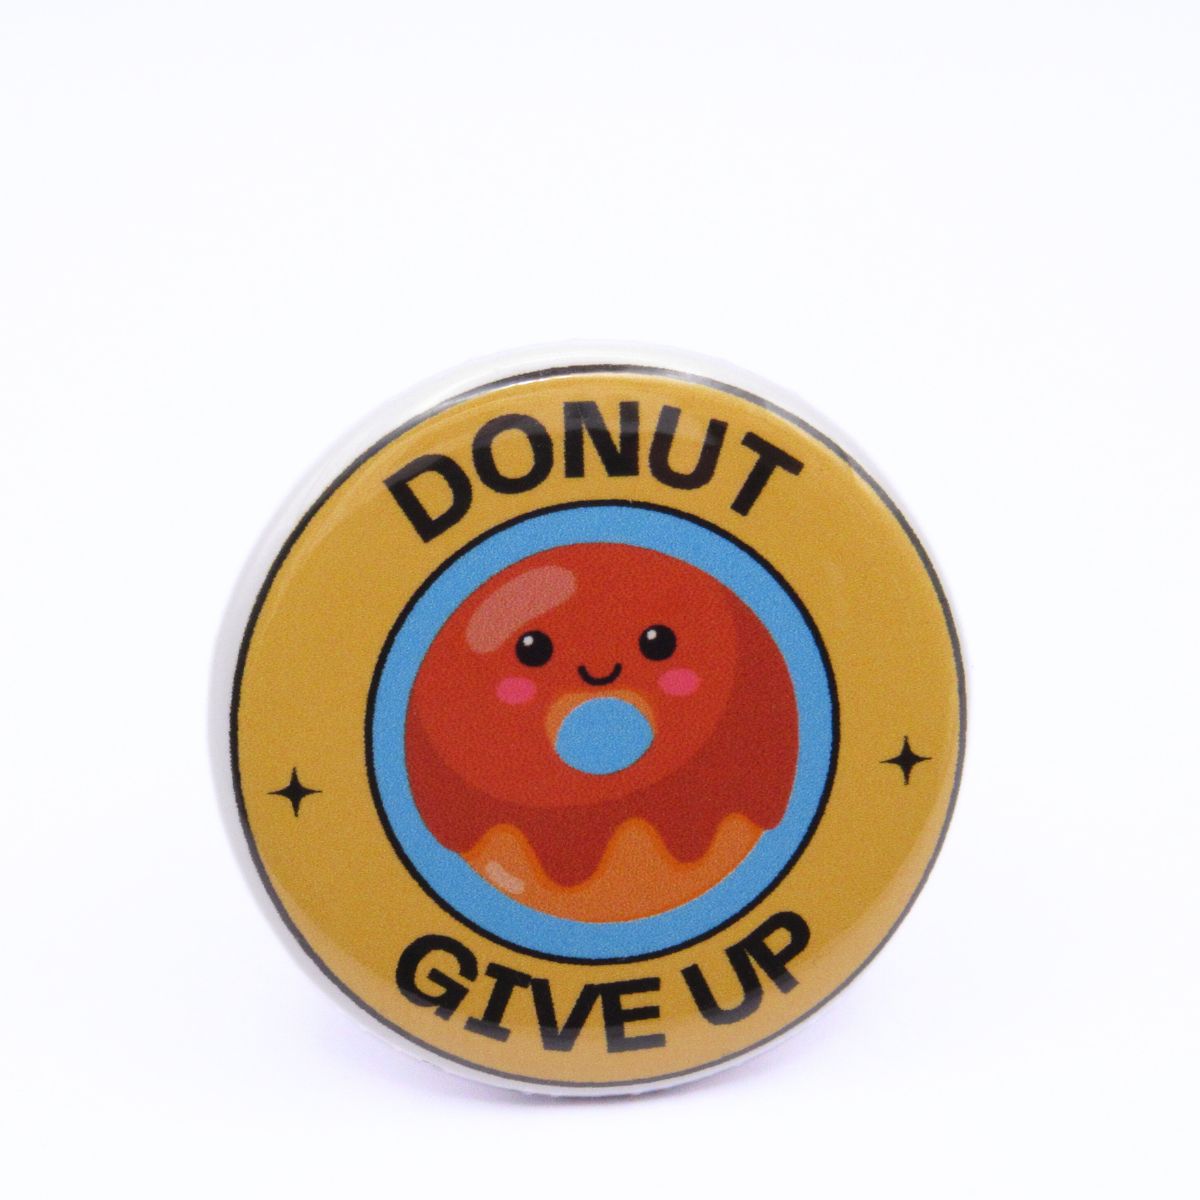 BooBooRoo Pinback Button (i.e. button, badge, pin) of a Cute Kawaii Style donut with the saying "Donut Give Up."